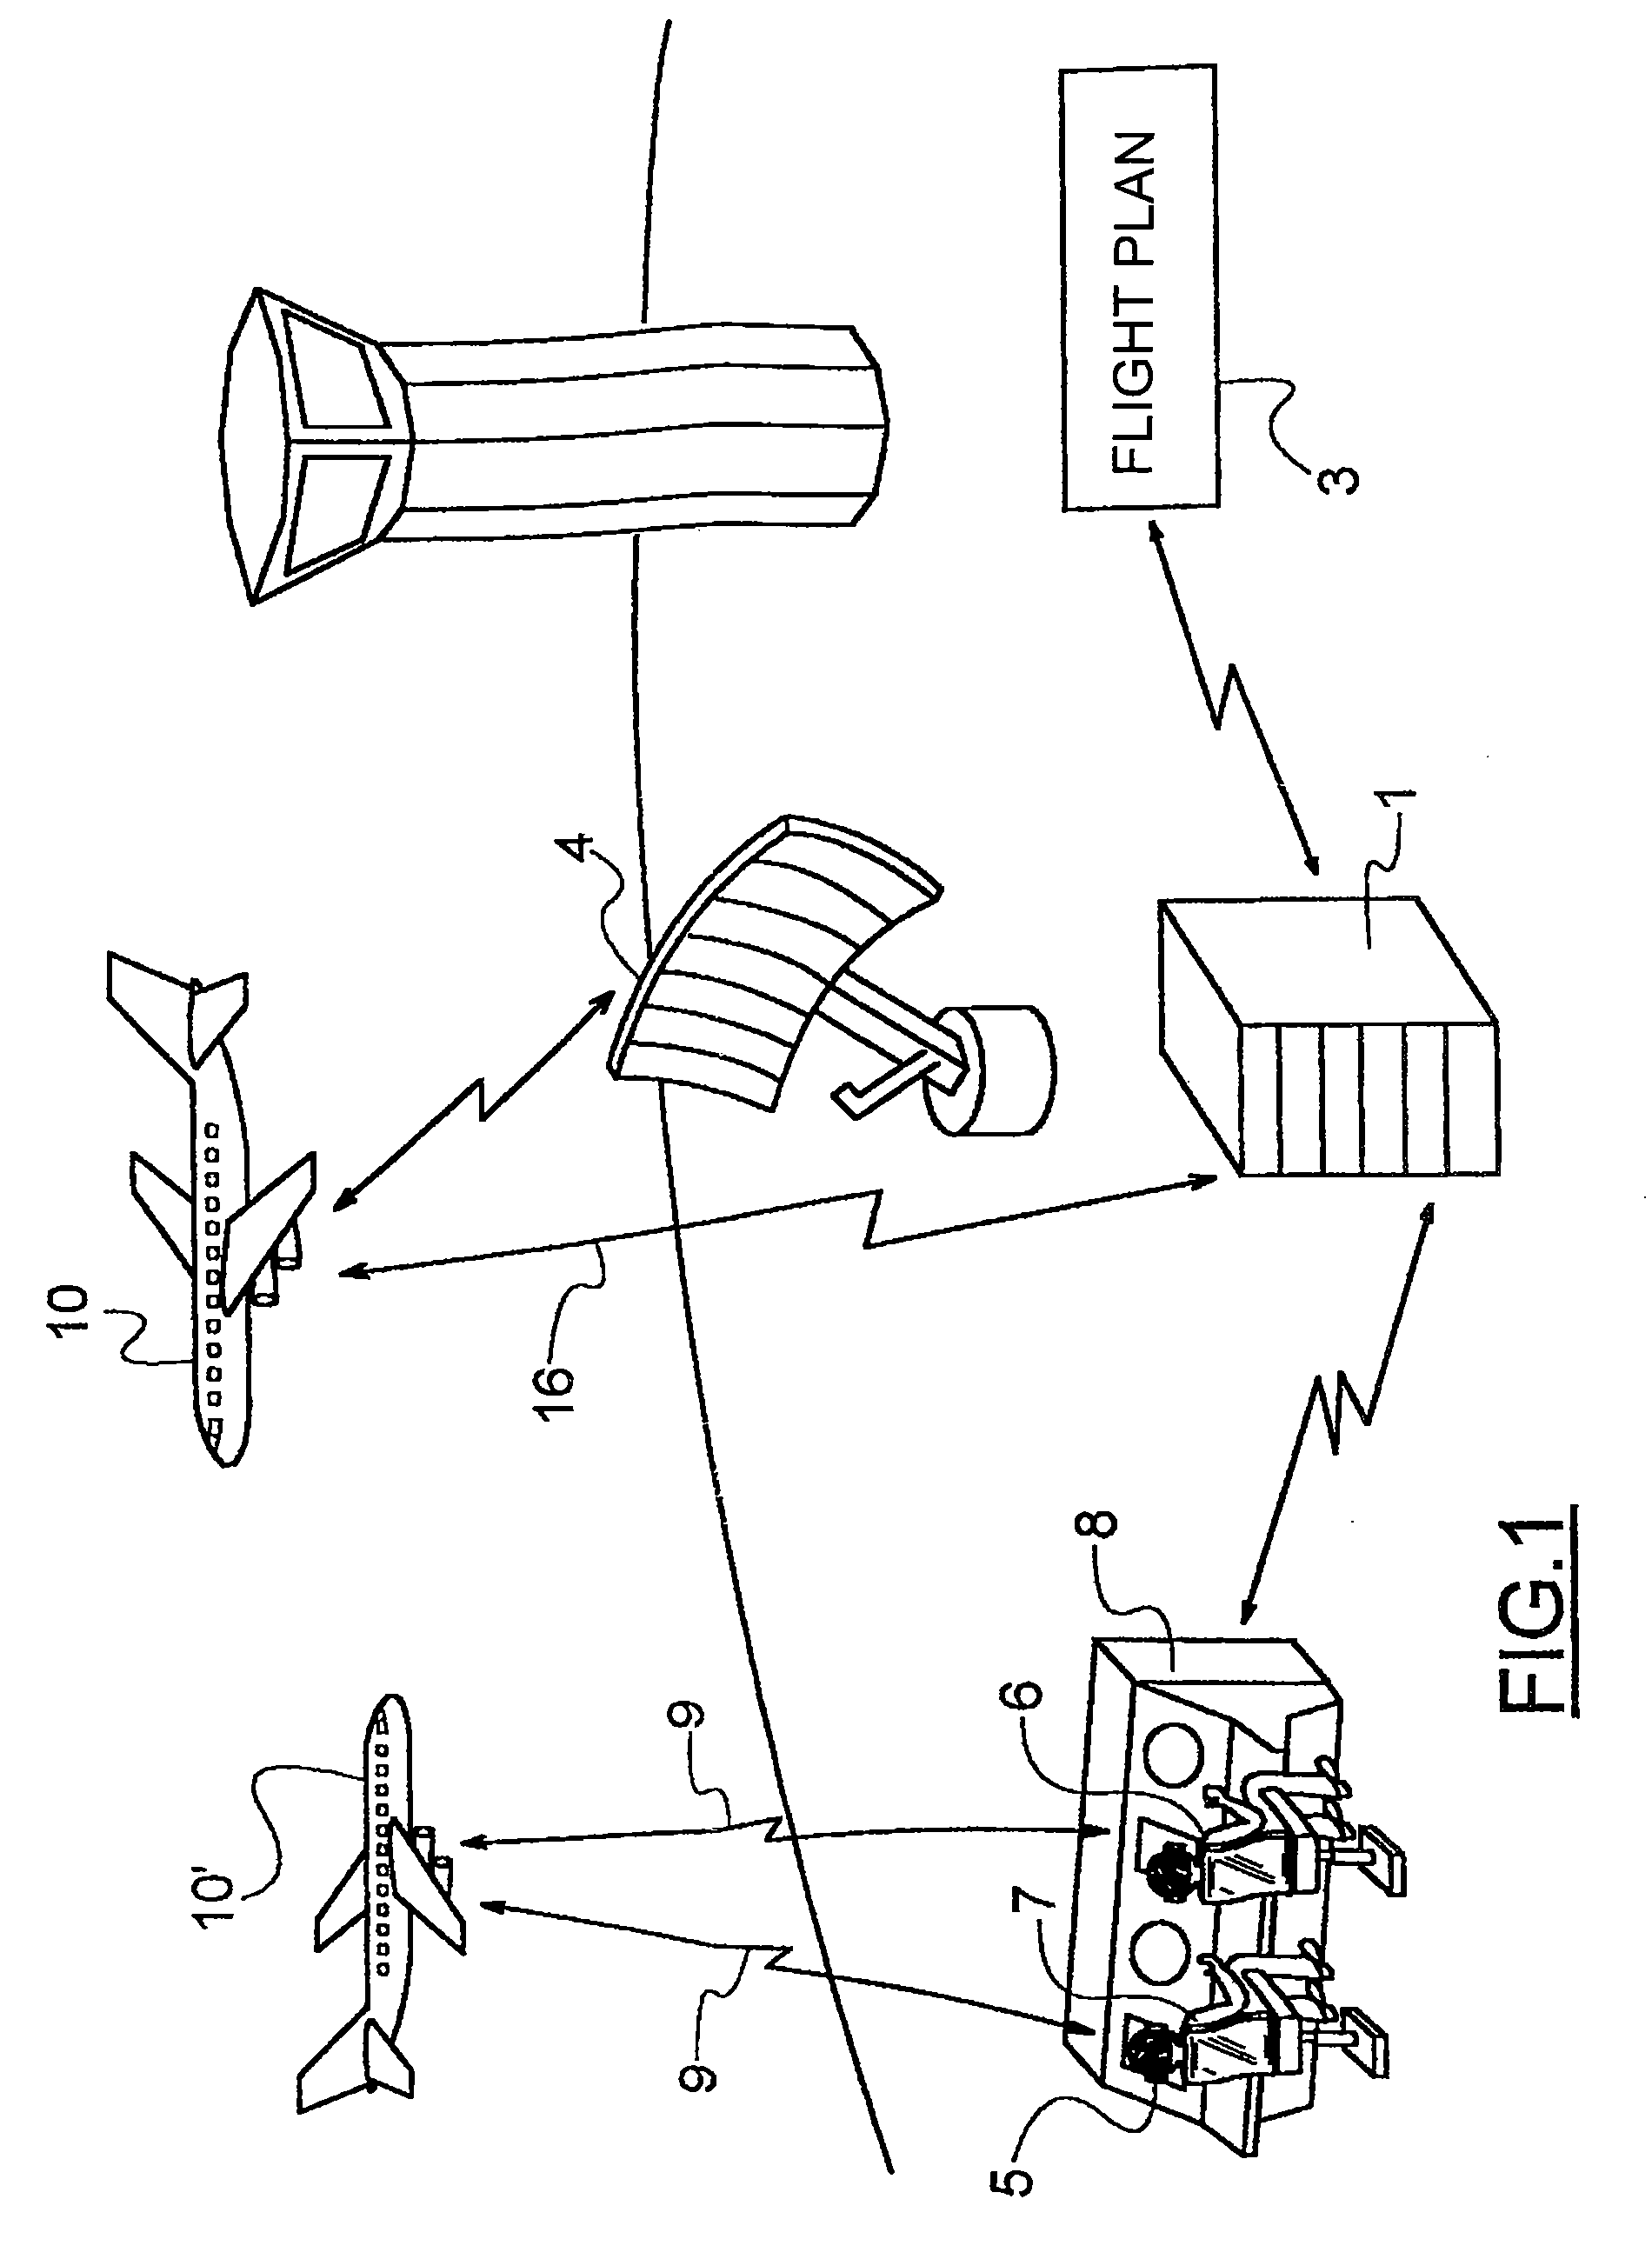 Device and method for providing automatic assistance to air traffic controllers